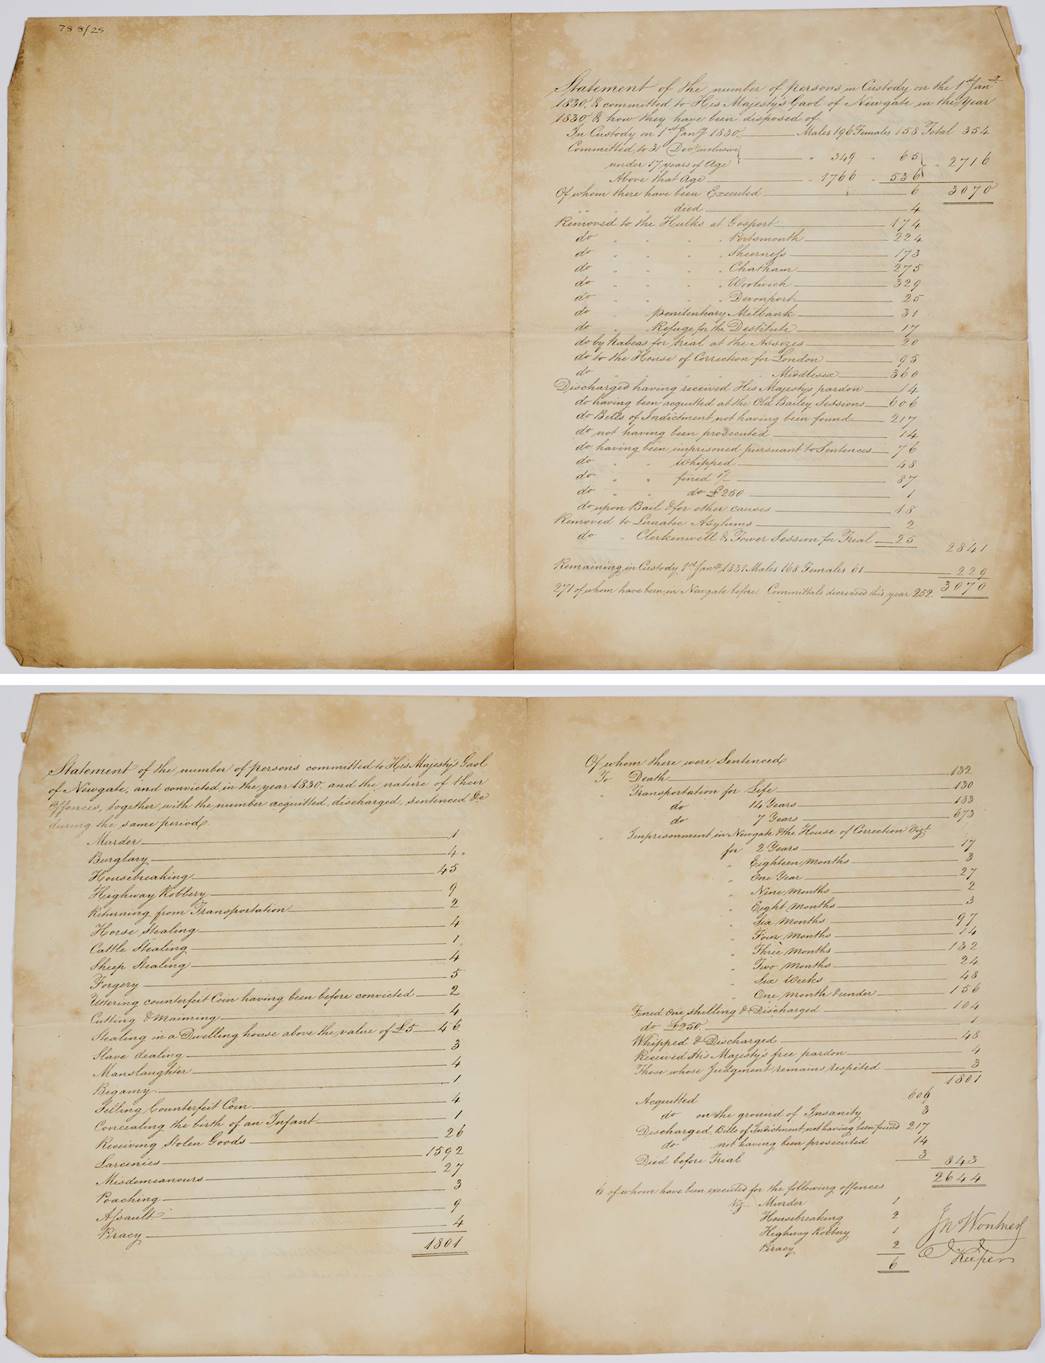 This document lists the convicted prisoners who were sent to hulks from prison in 1830. (ID no.: 78.8/25)